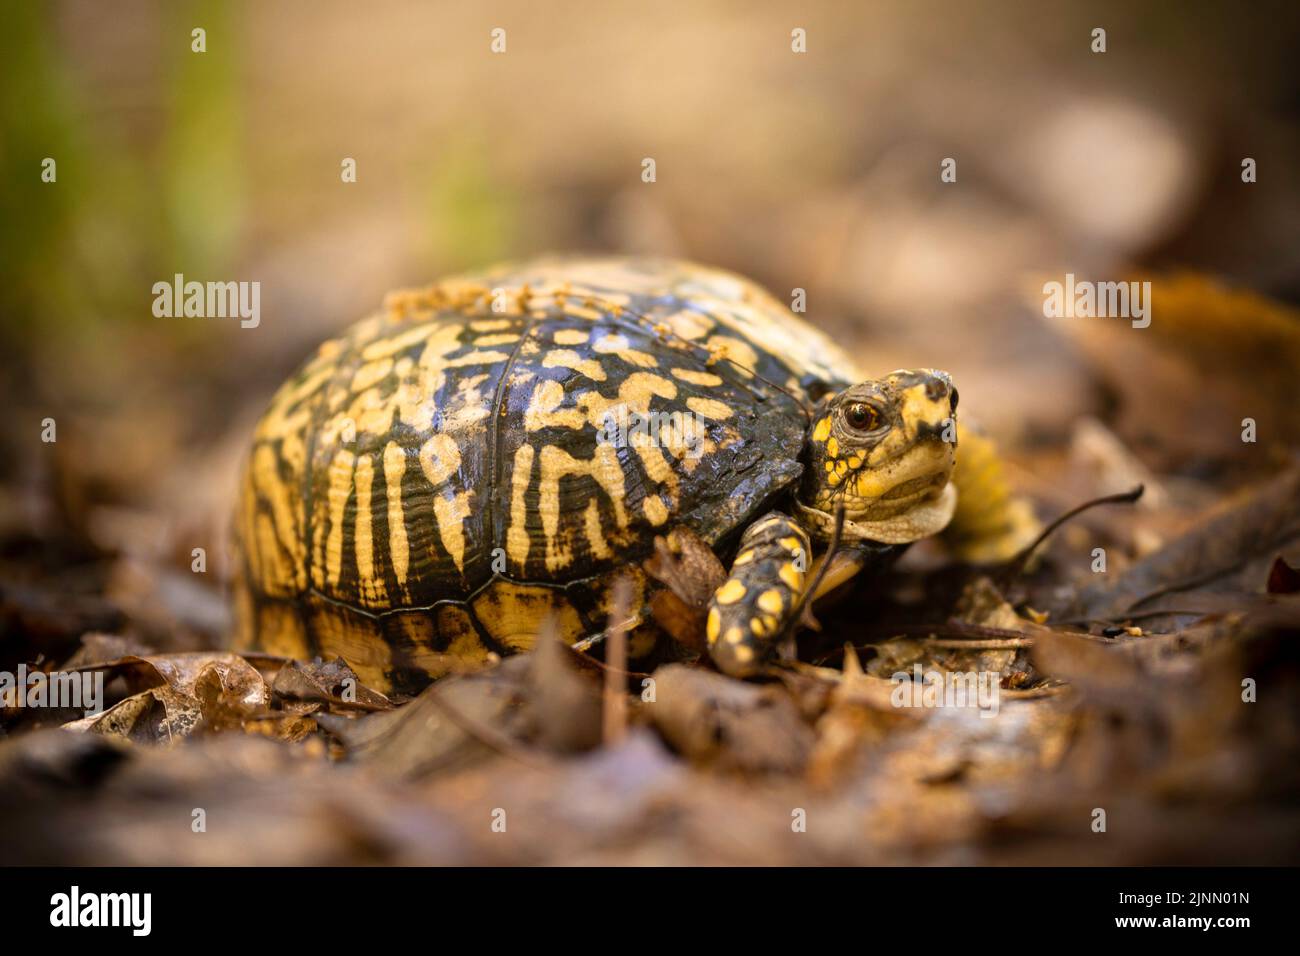 A close up of an Eastern Box Turtle warms himself up in a sunny spot on the forest floor.  Taken in Indiana during their breeding season. Stock Photo